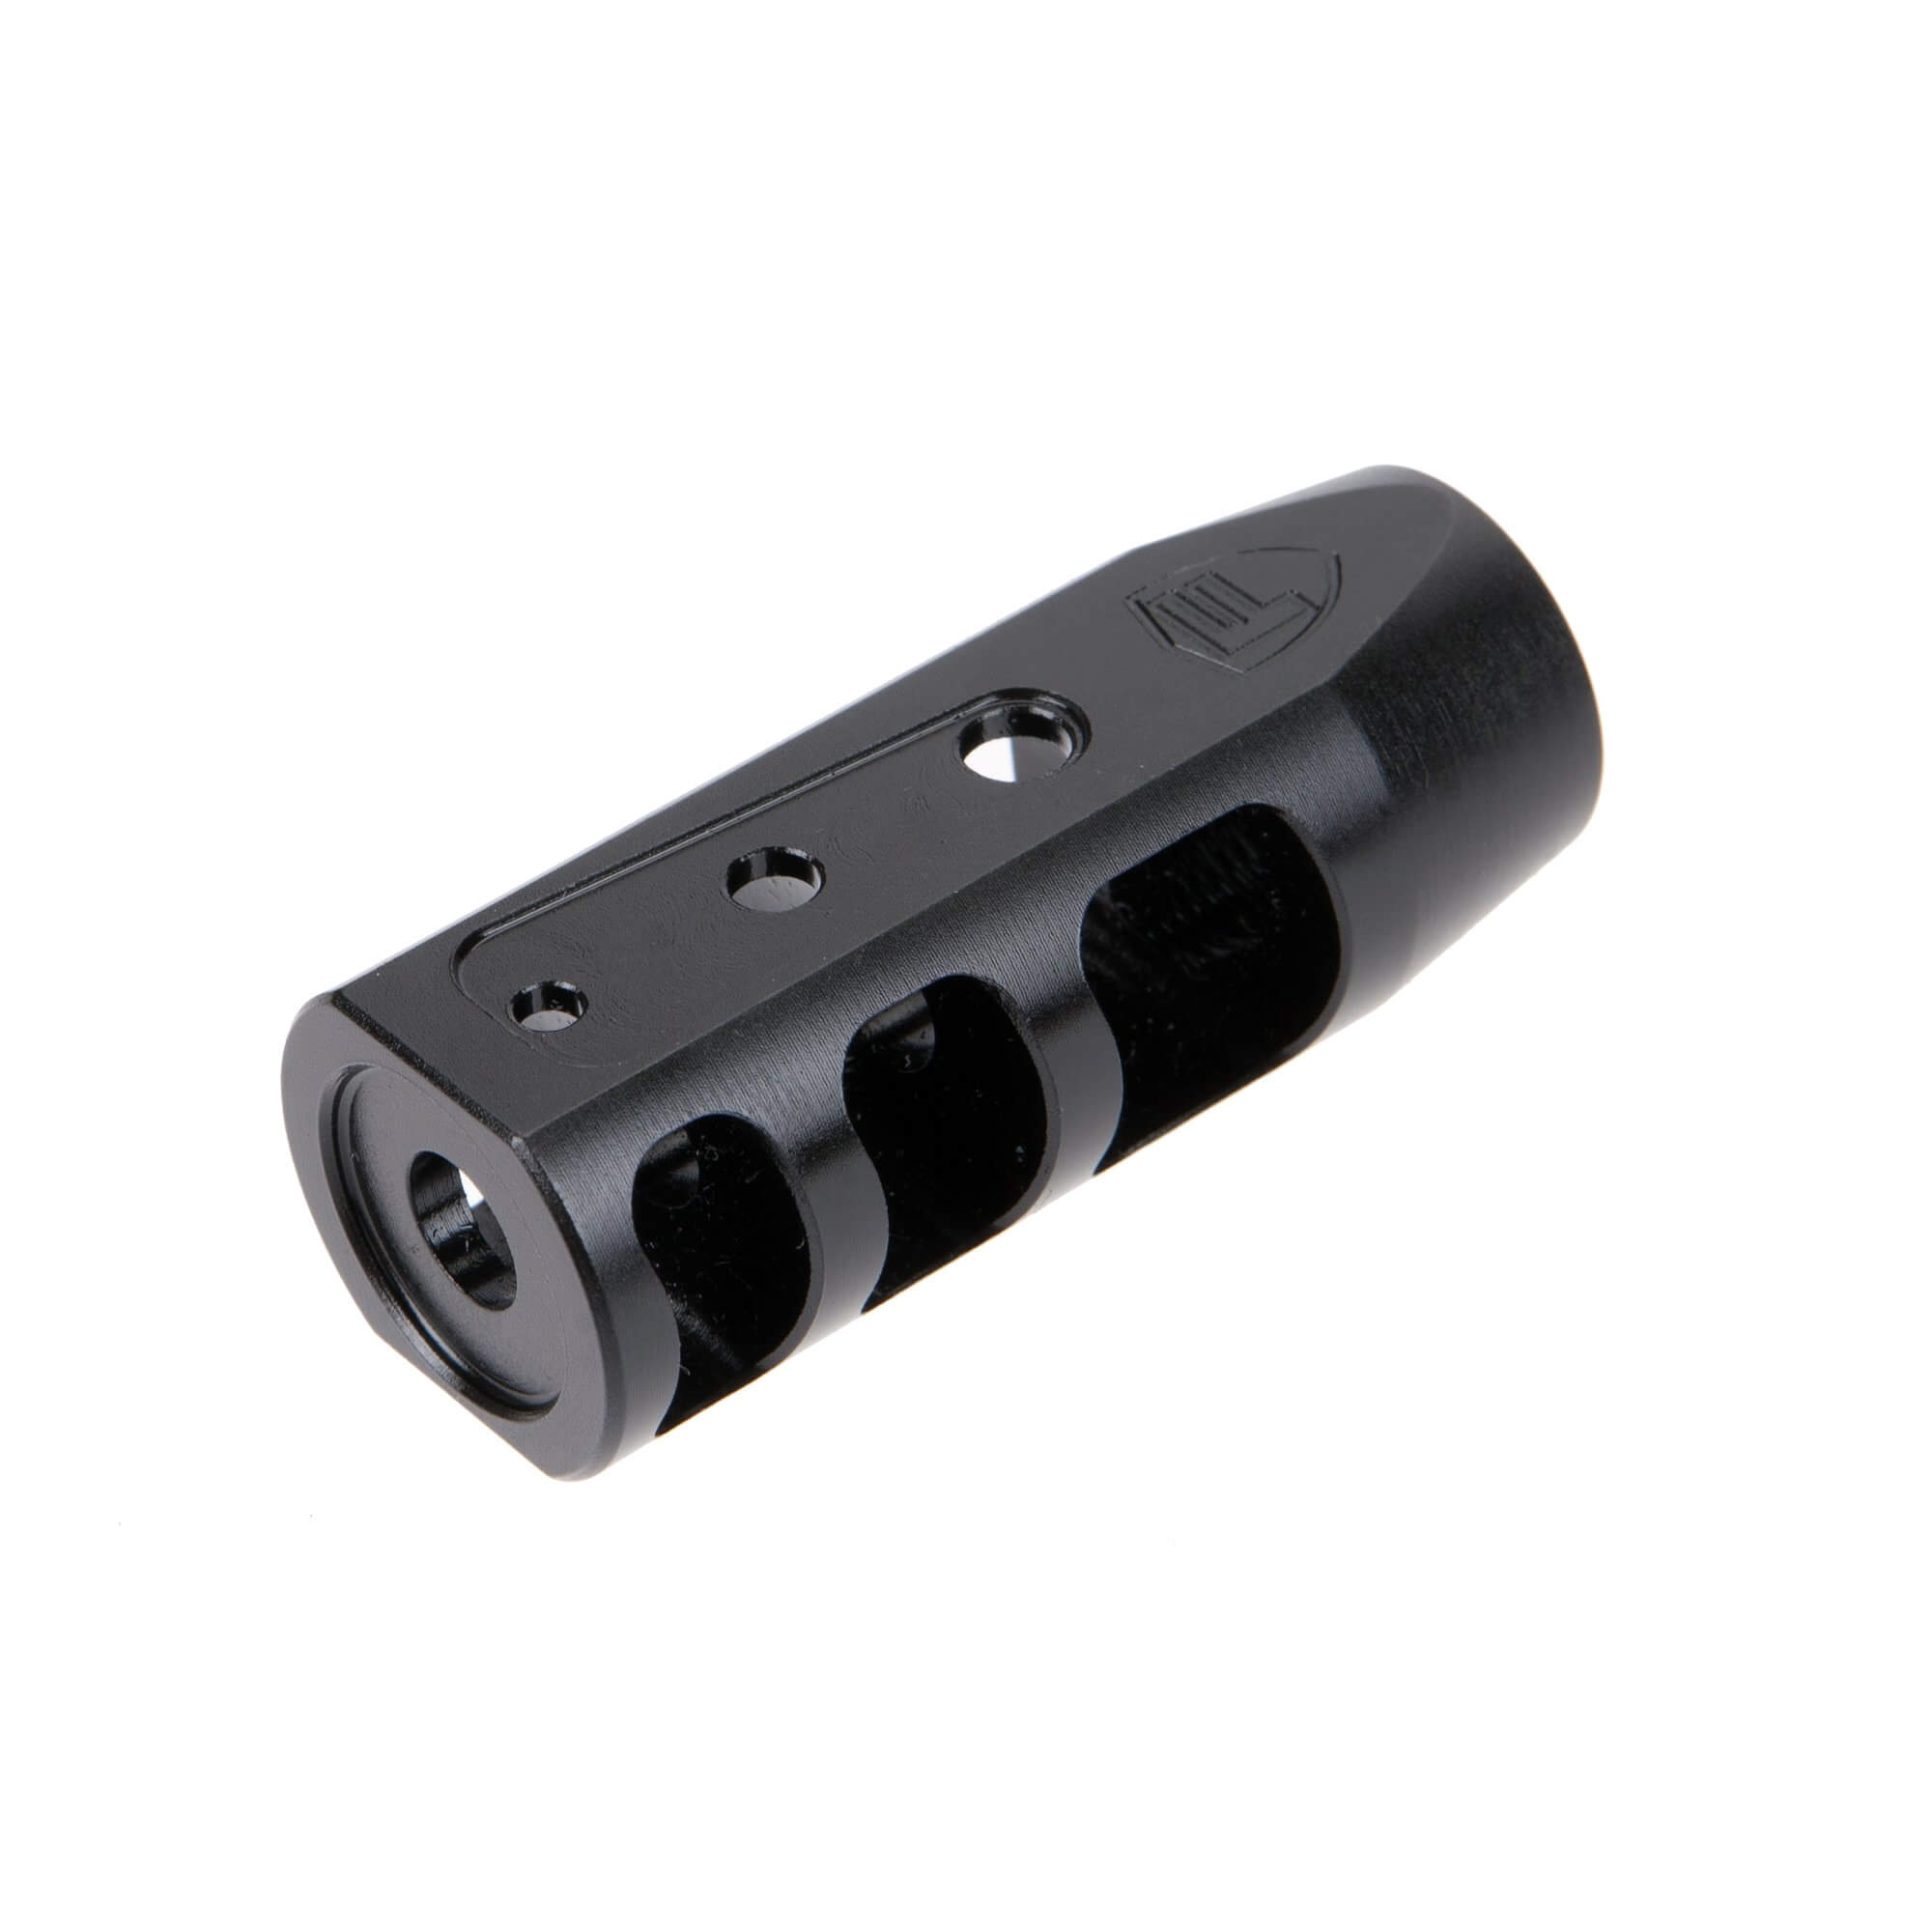 Fortis RED 556 Muzzle Brake, AR-15 Accessories